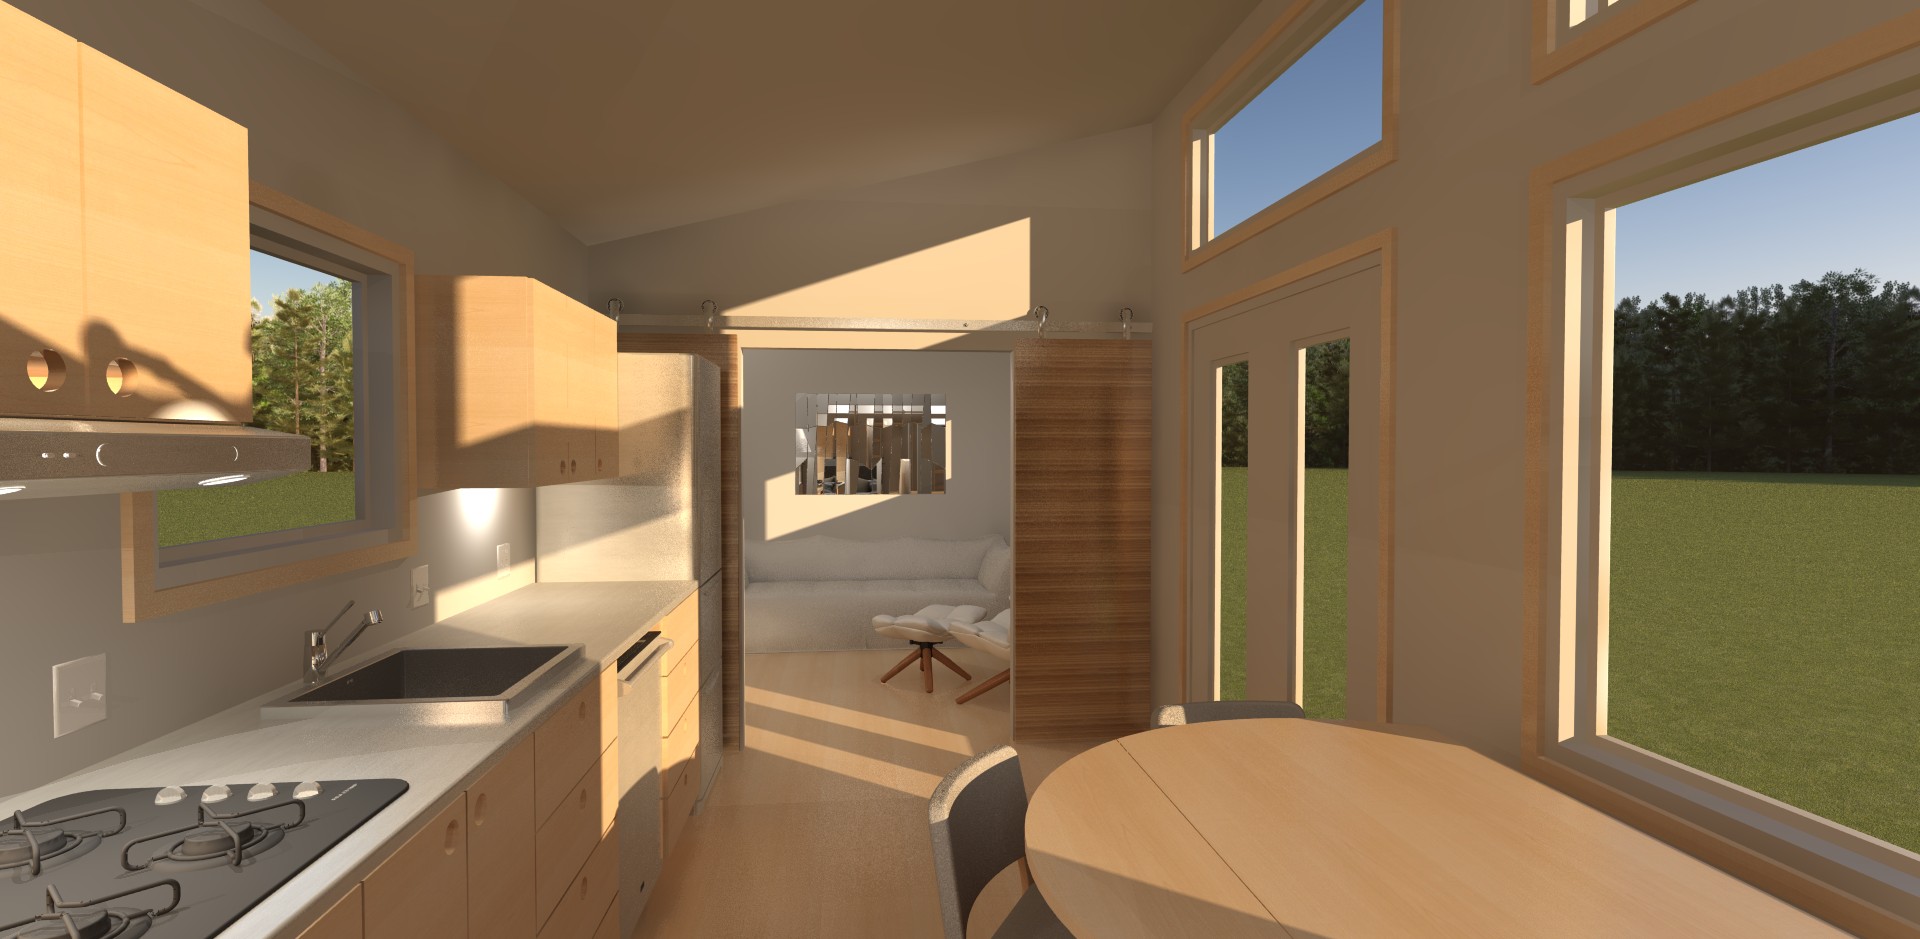 Design Guidelines for a Net Zero Tiny House – TinyHouseDesign